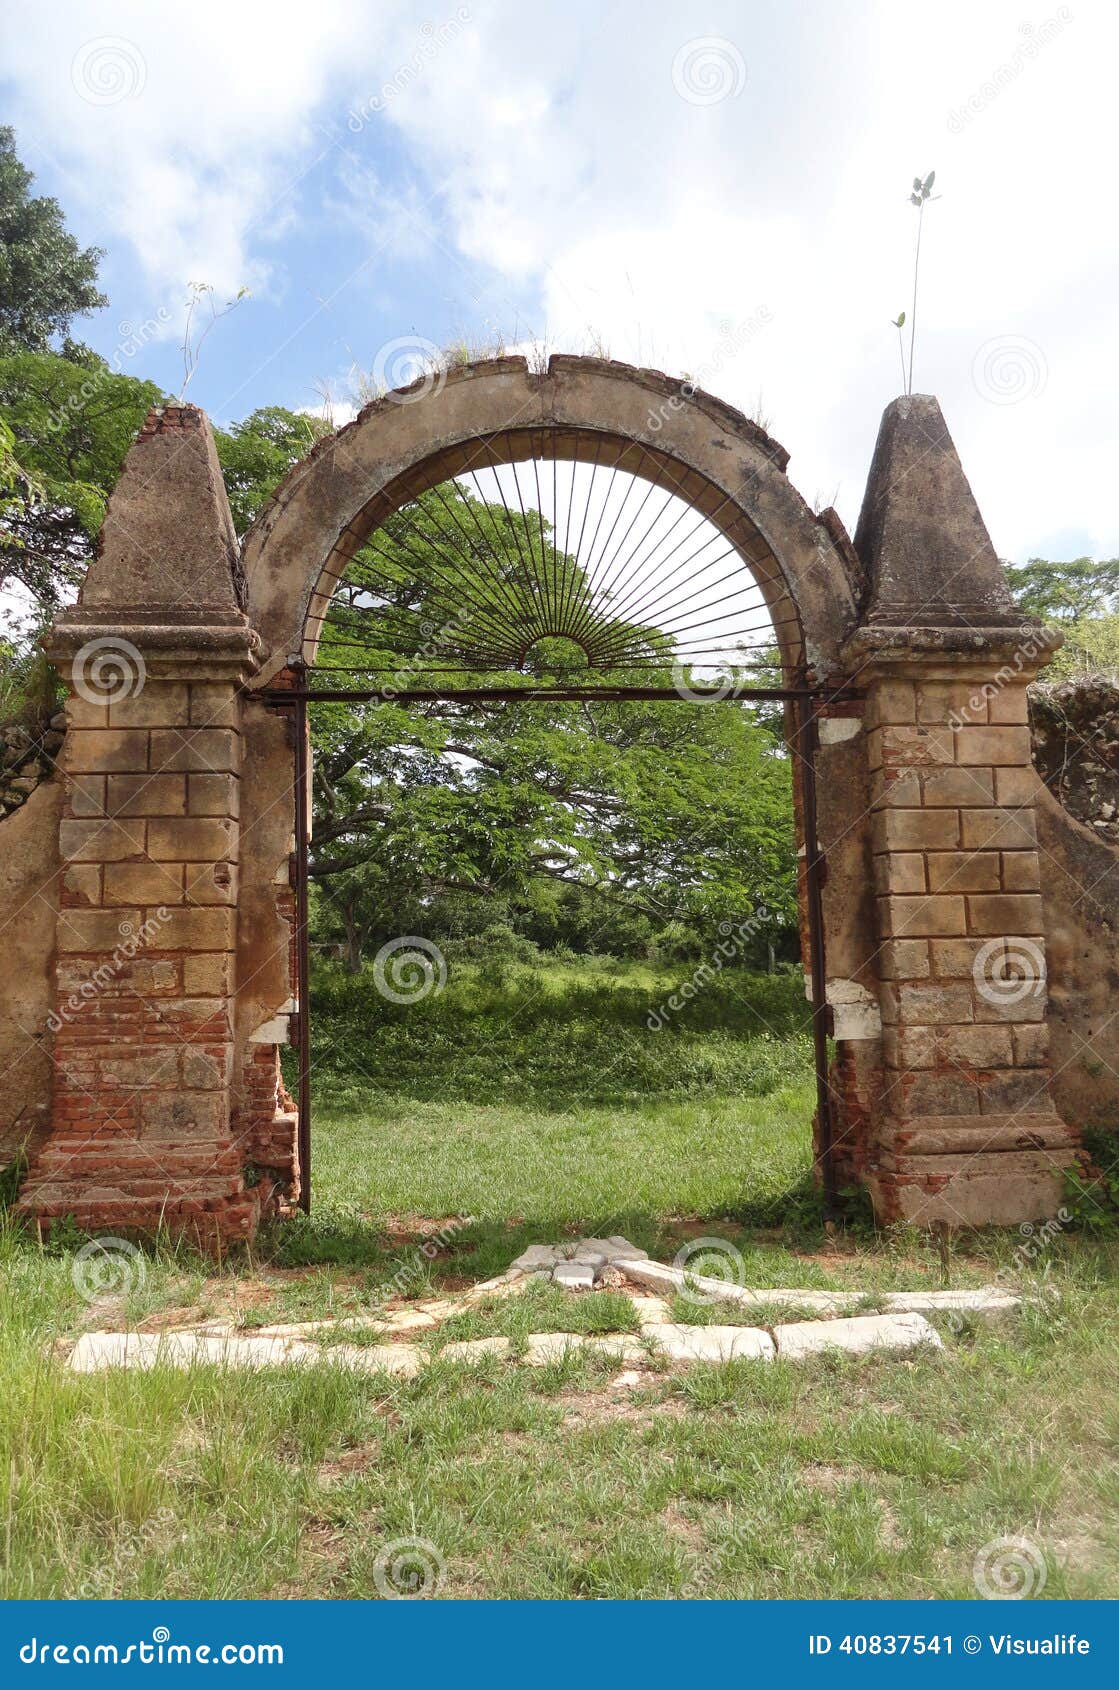 iron door and stone walls of colonial coffe plantation